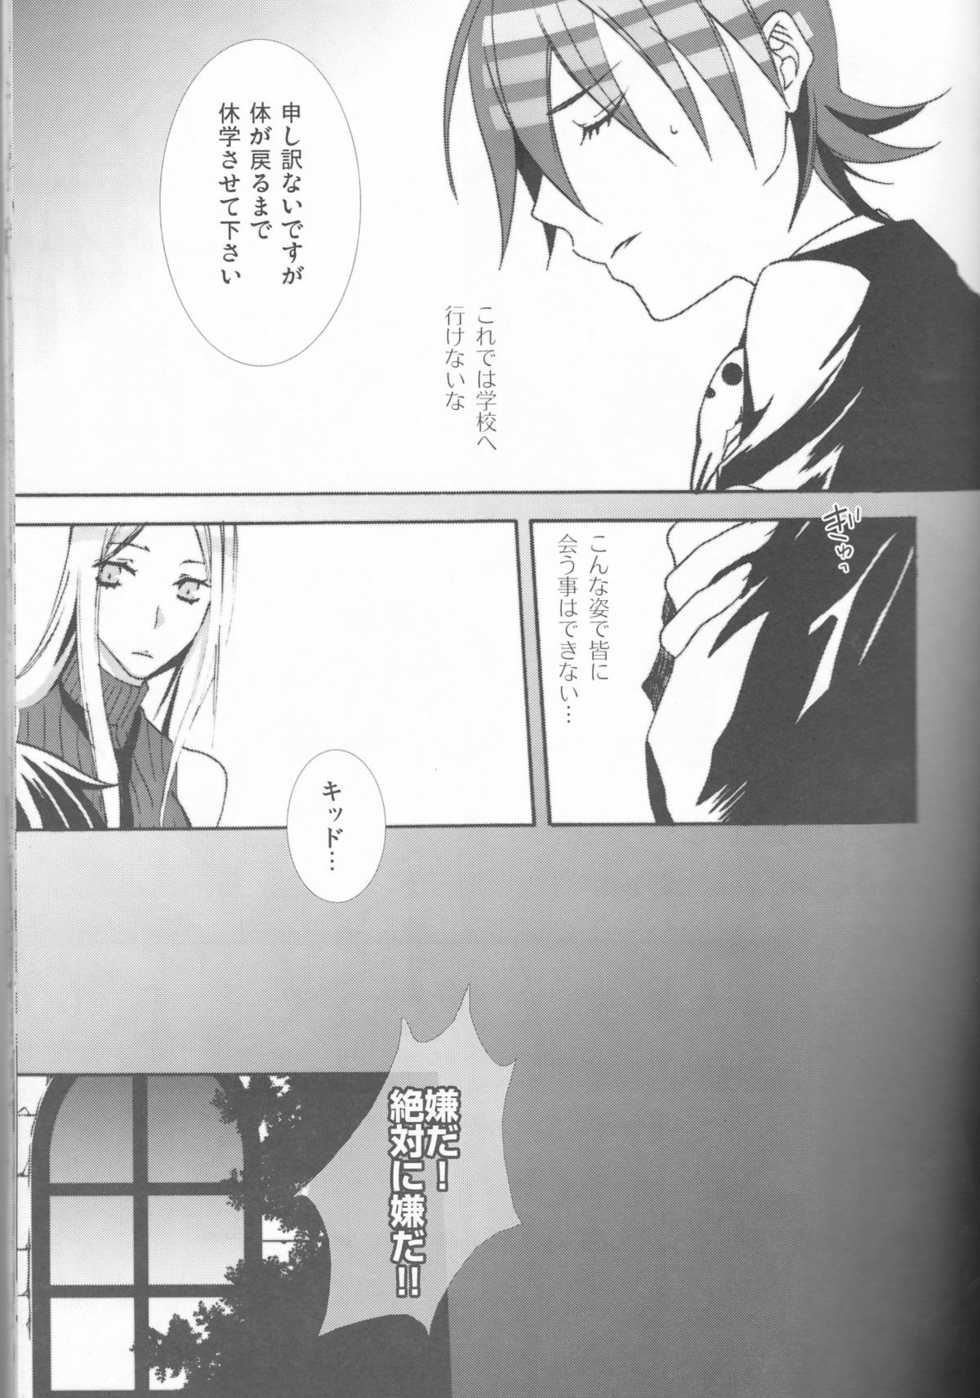 [90℃ (Suwo)] Camical Candy Show Case (Soul Eater) - Page 11